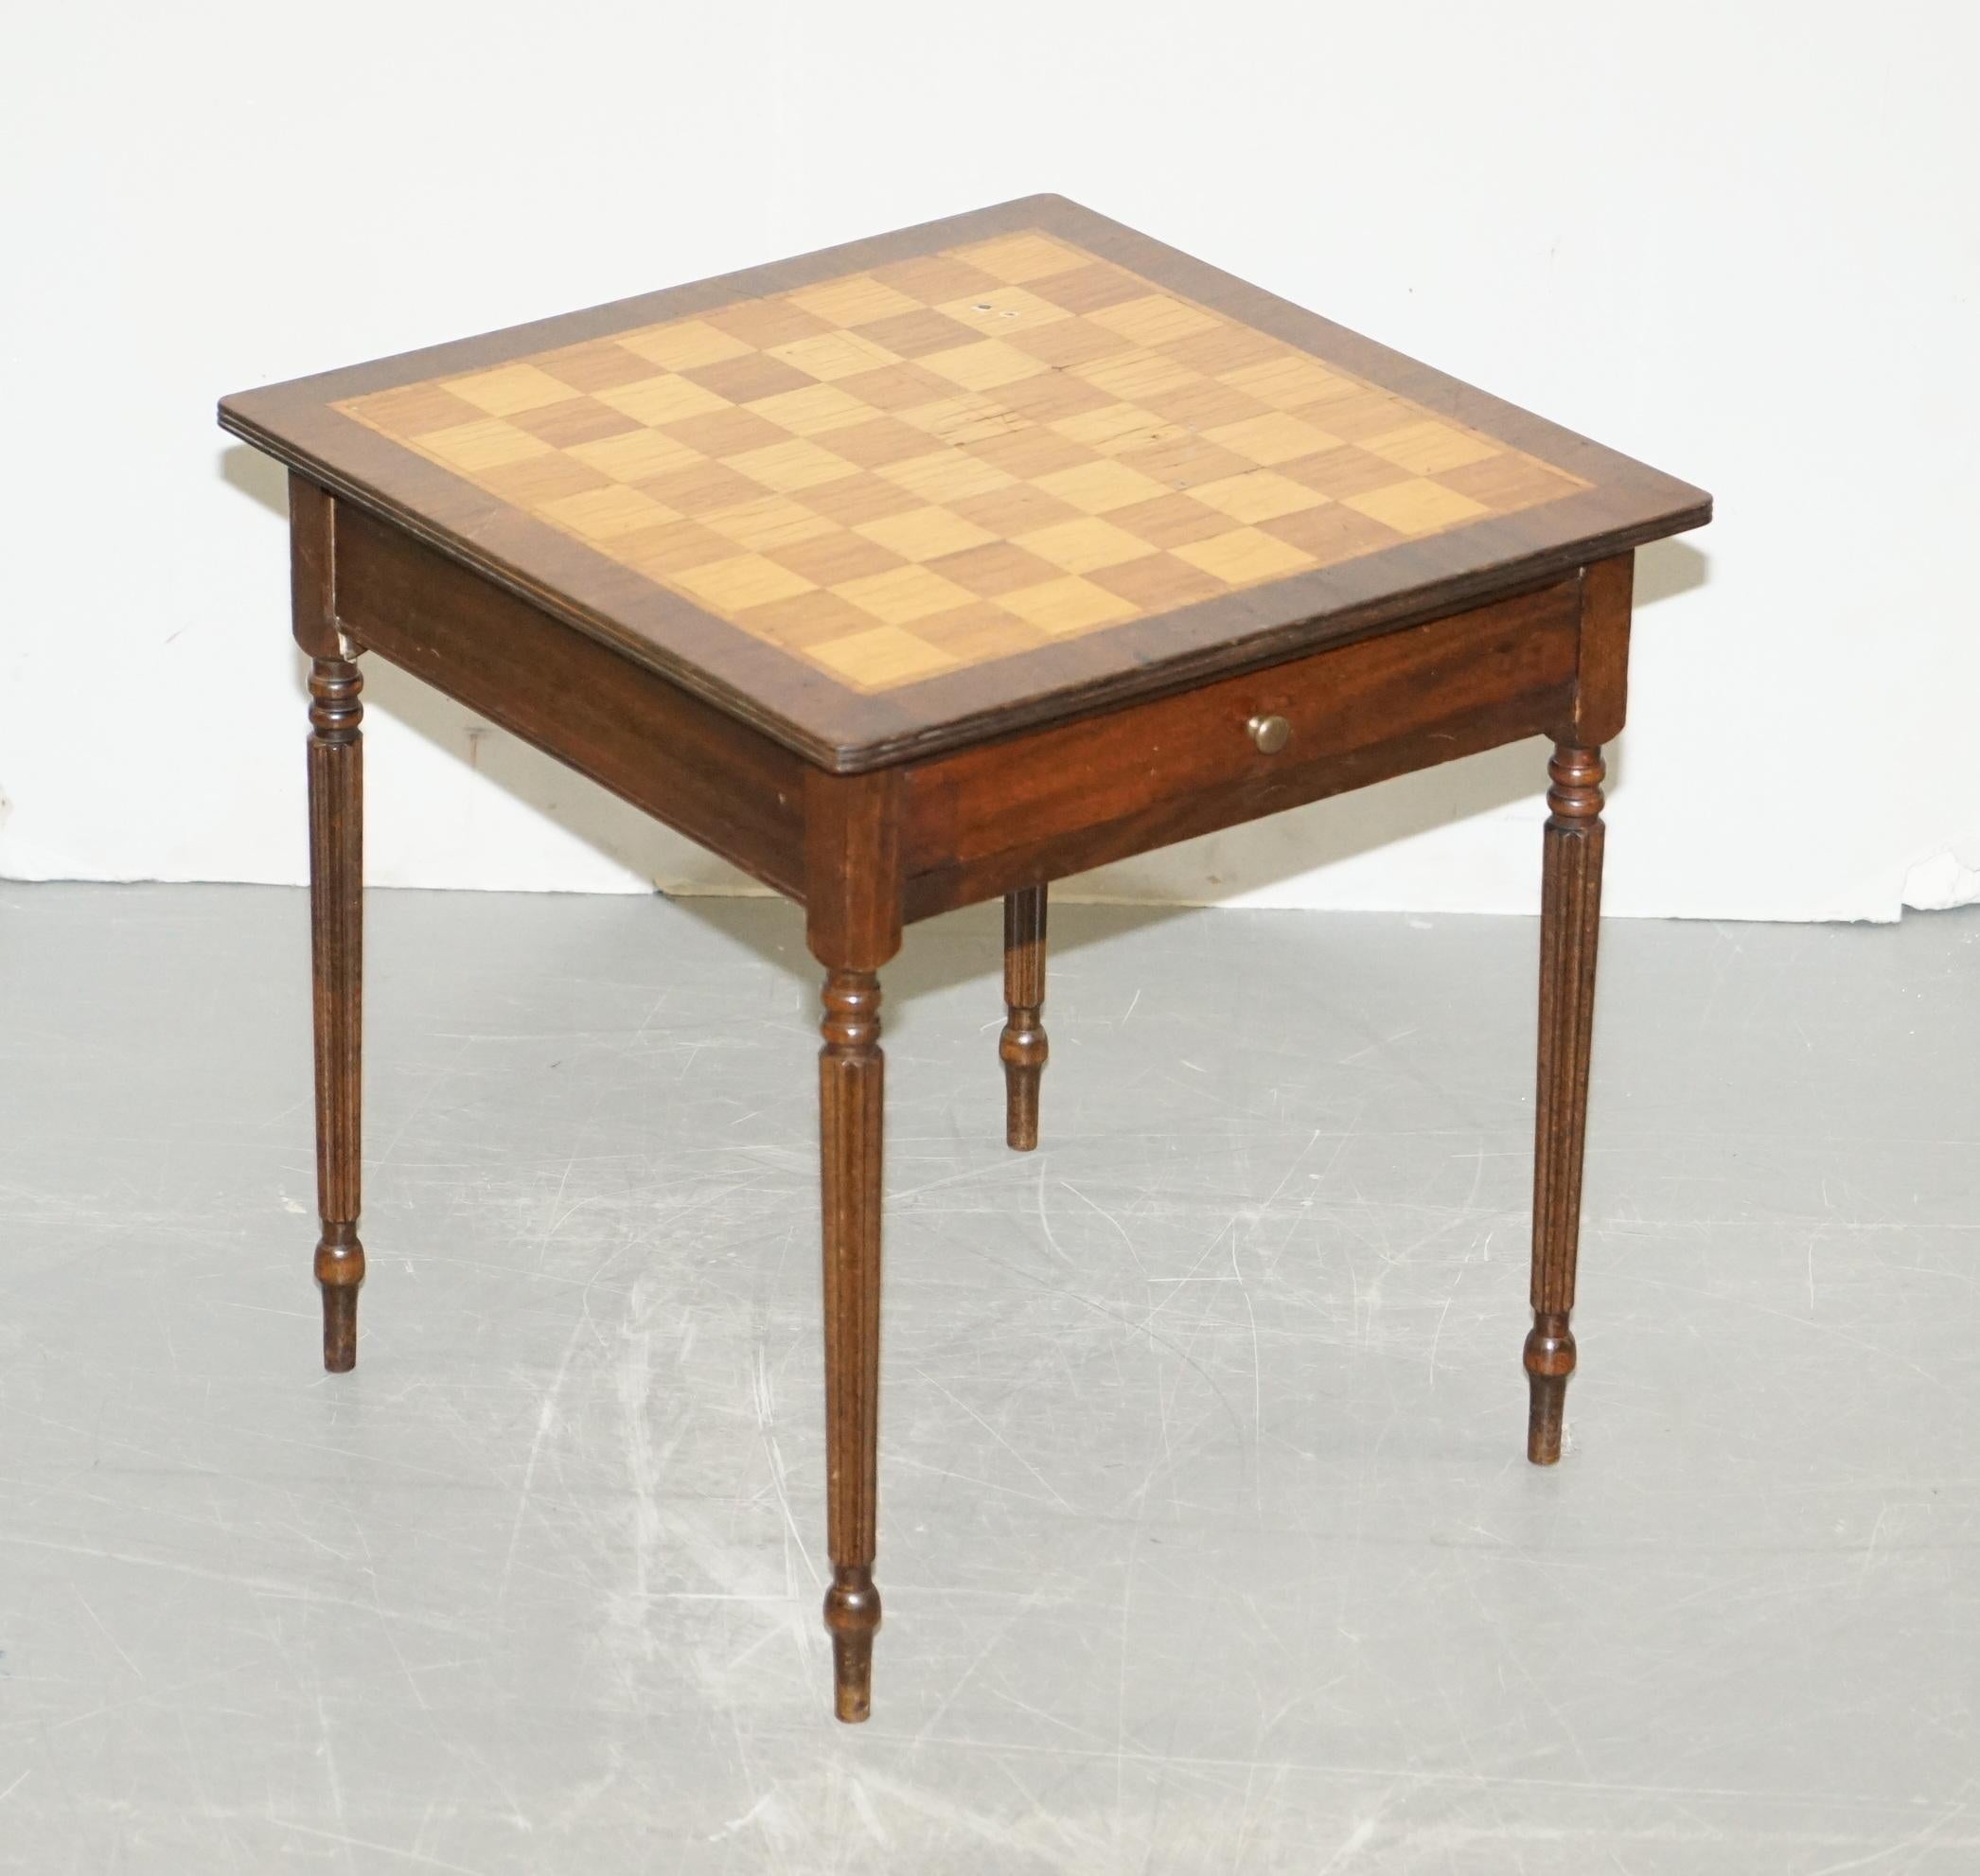 We are delighted to offer for sale this lovely vintage marquetry inlaid Chess board games table

A very good looking well made and function piece of furniture, extremely decorative, the top has nice Walnut & Mahogany timber which beautifully